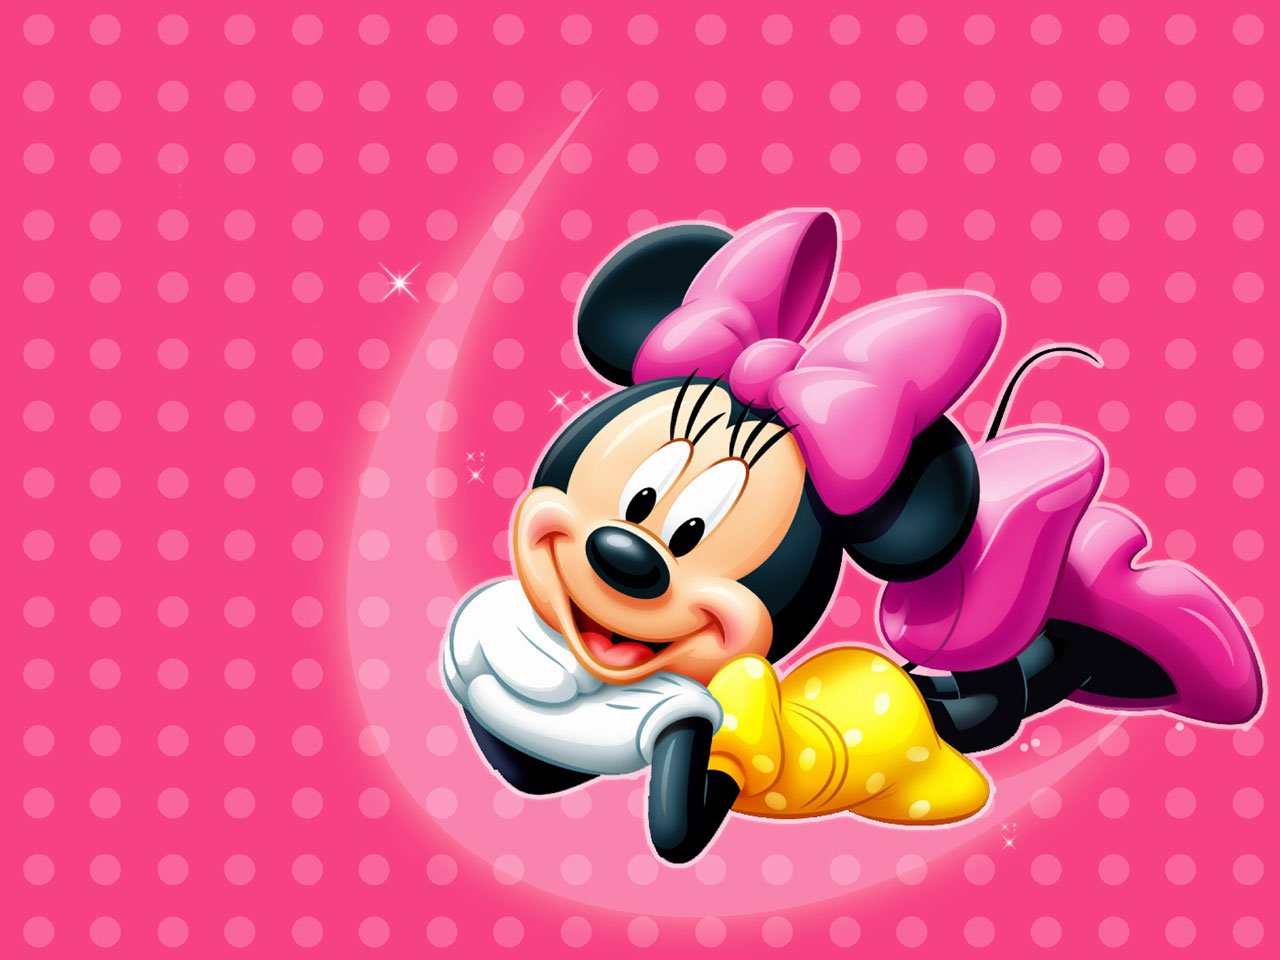 Mickey Mouse Wallpapers Hd Bergerak And Minnie Free Minnie Android